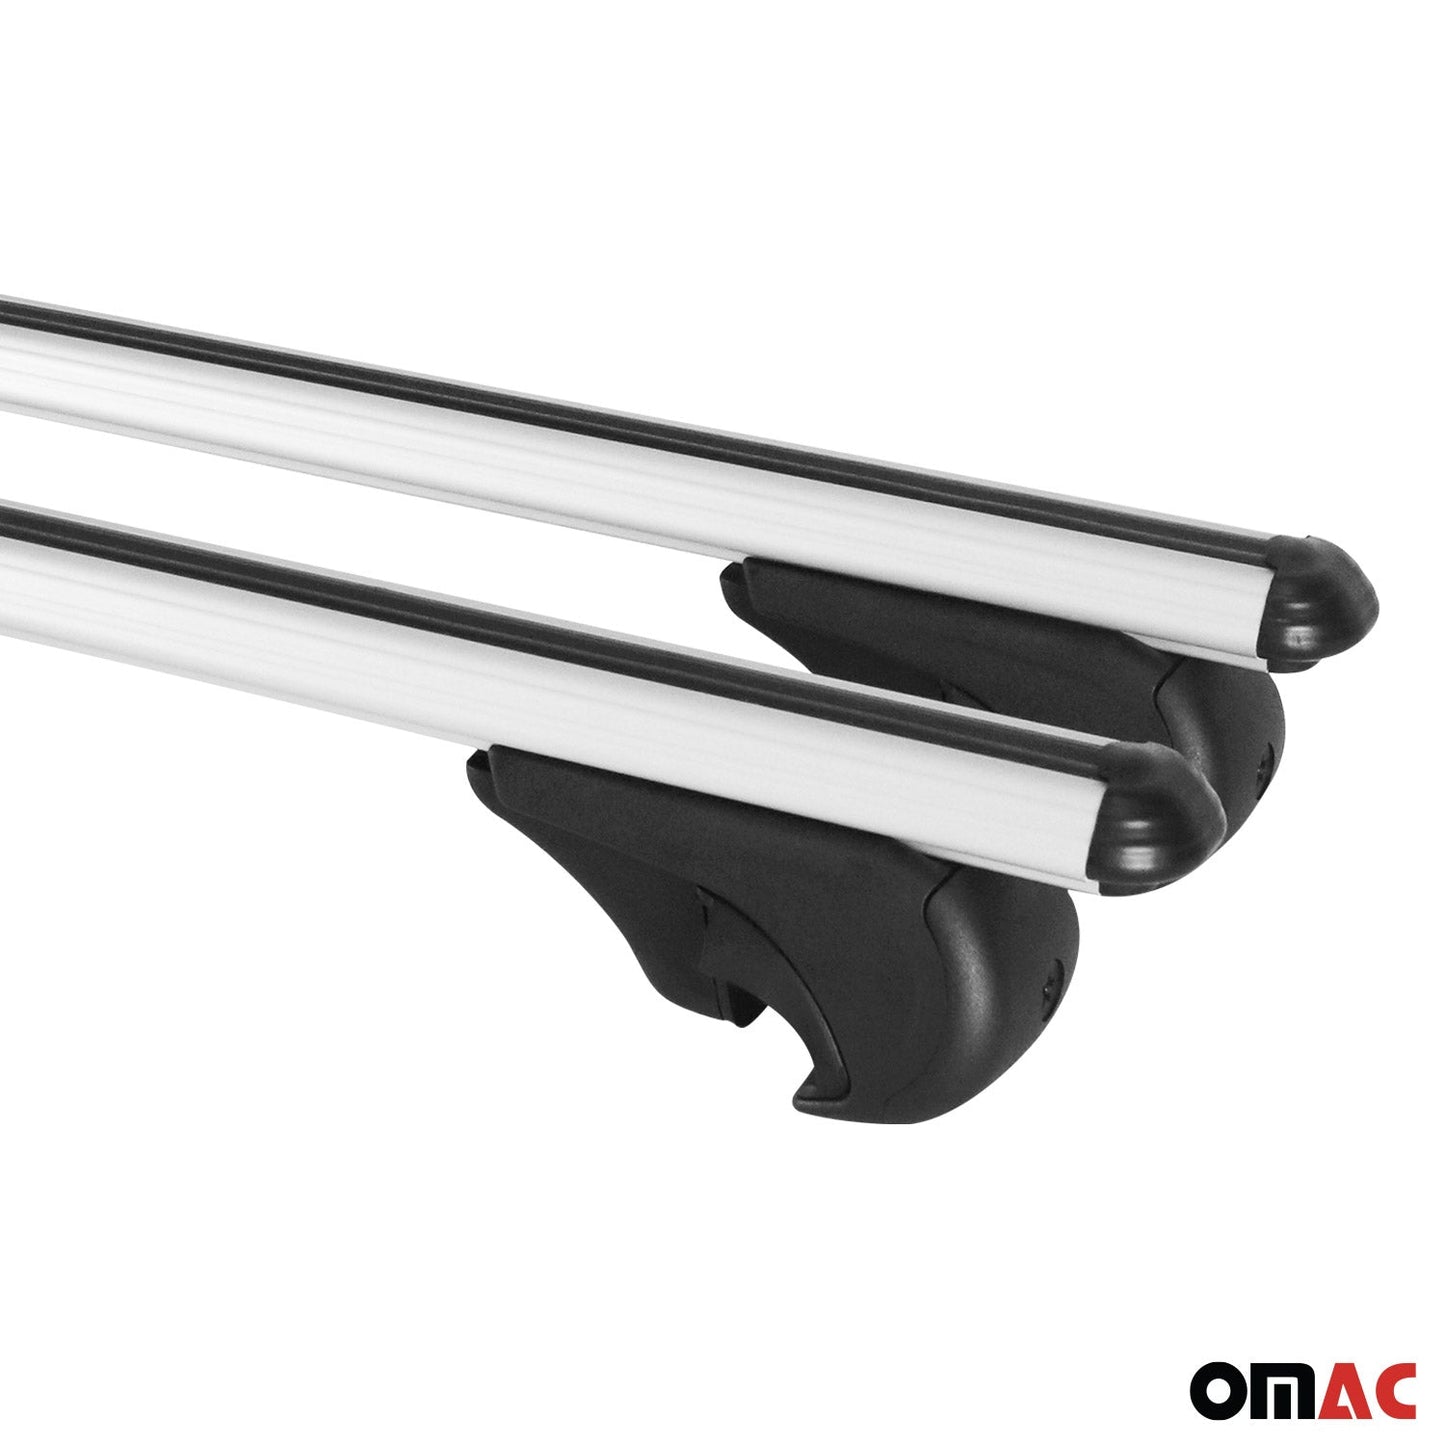 OMAC Roof Rack Cross Bars Luggage Carrier Silver Set for BMW X5 2000-2006 12239696929XL